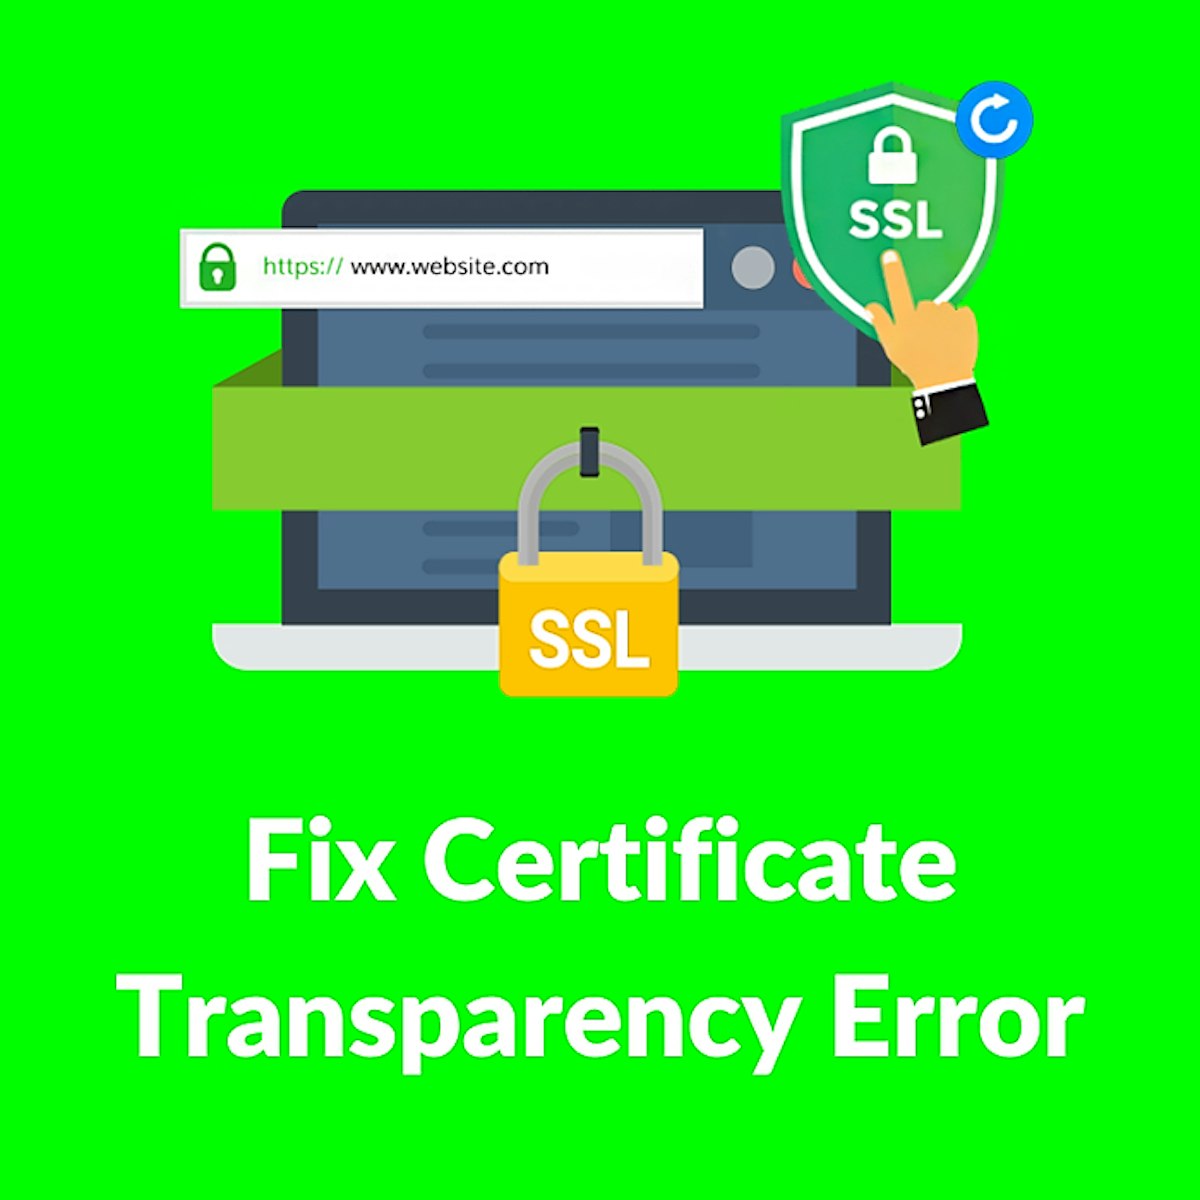 featured image - Know how to Fix NET: ERR_CERTIFICATE_TRANSPARENCY_REQUIRED Error